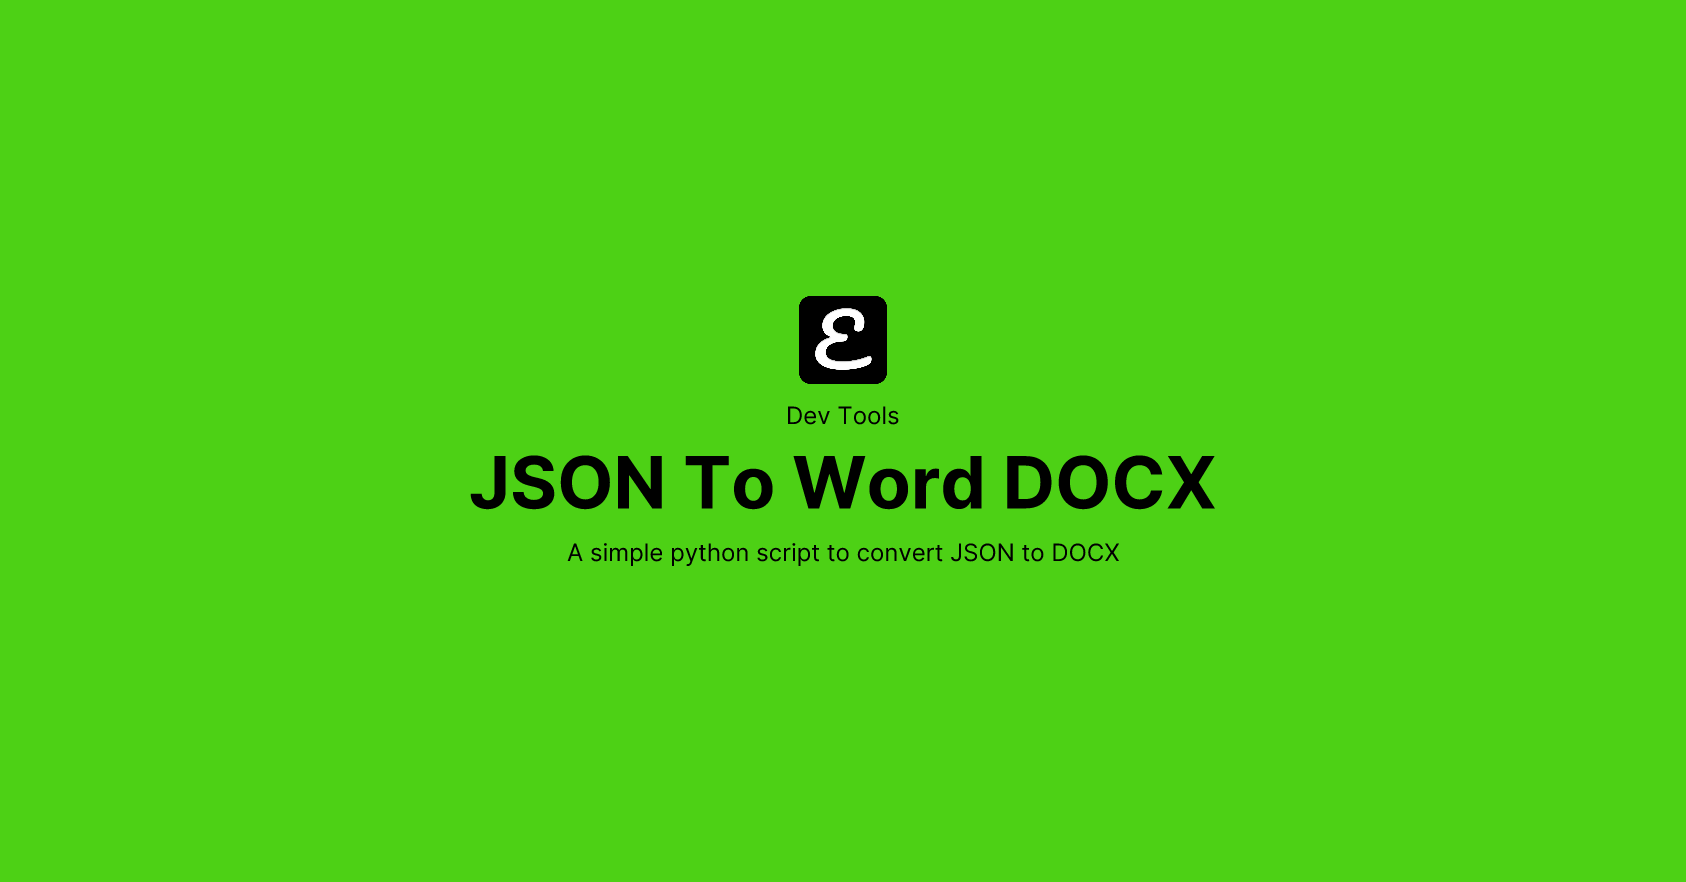 JSON To Word DOCX by Eric David Smith